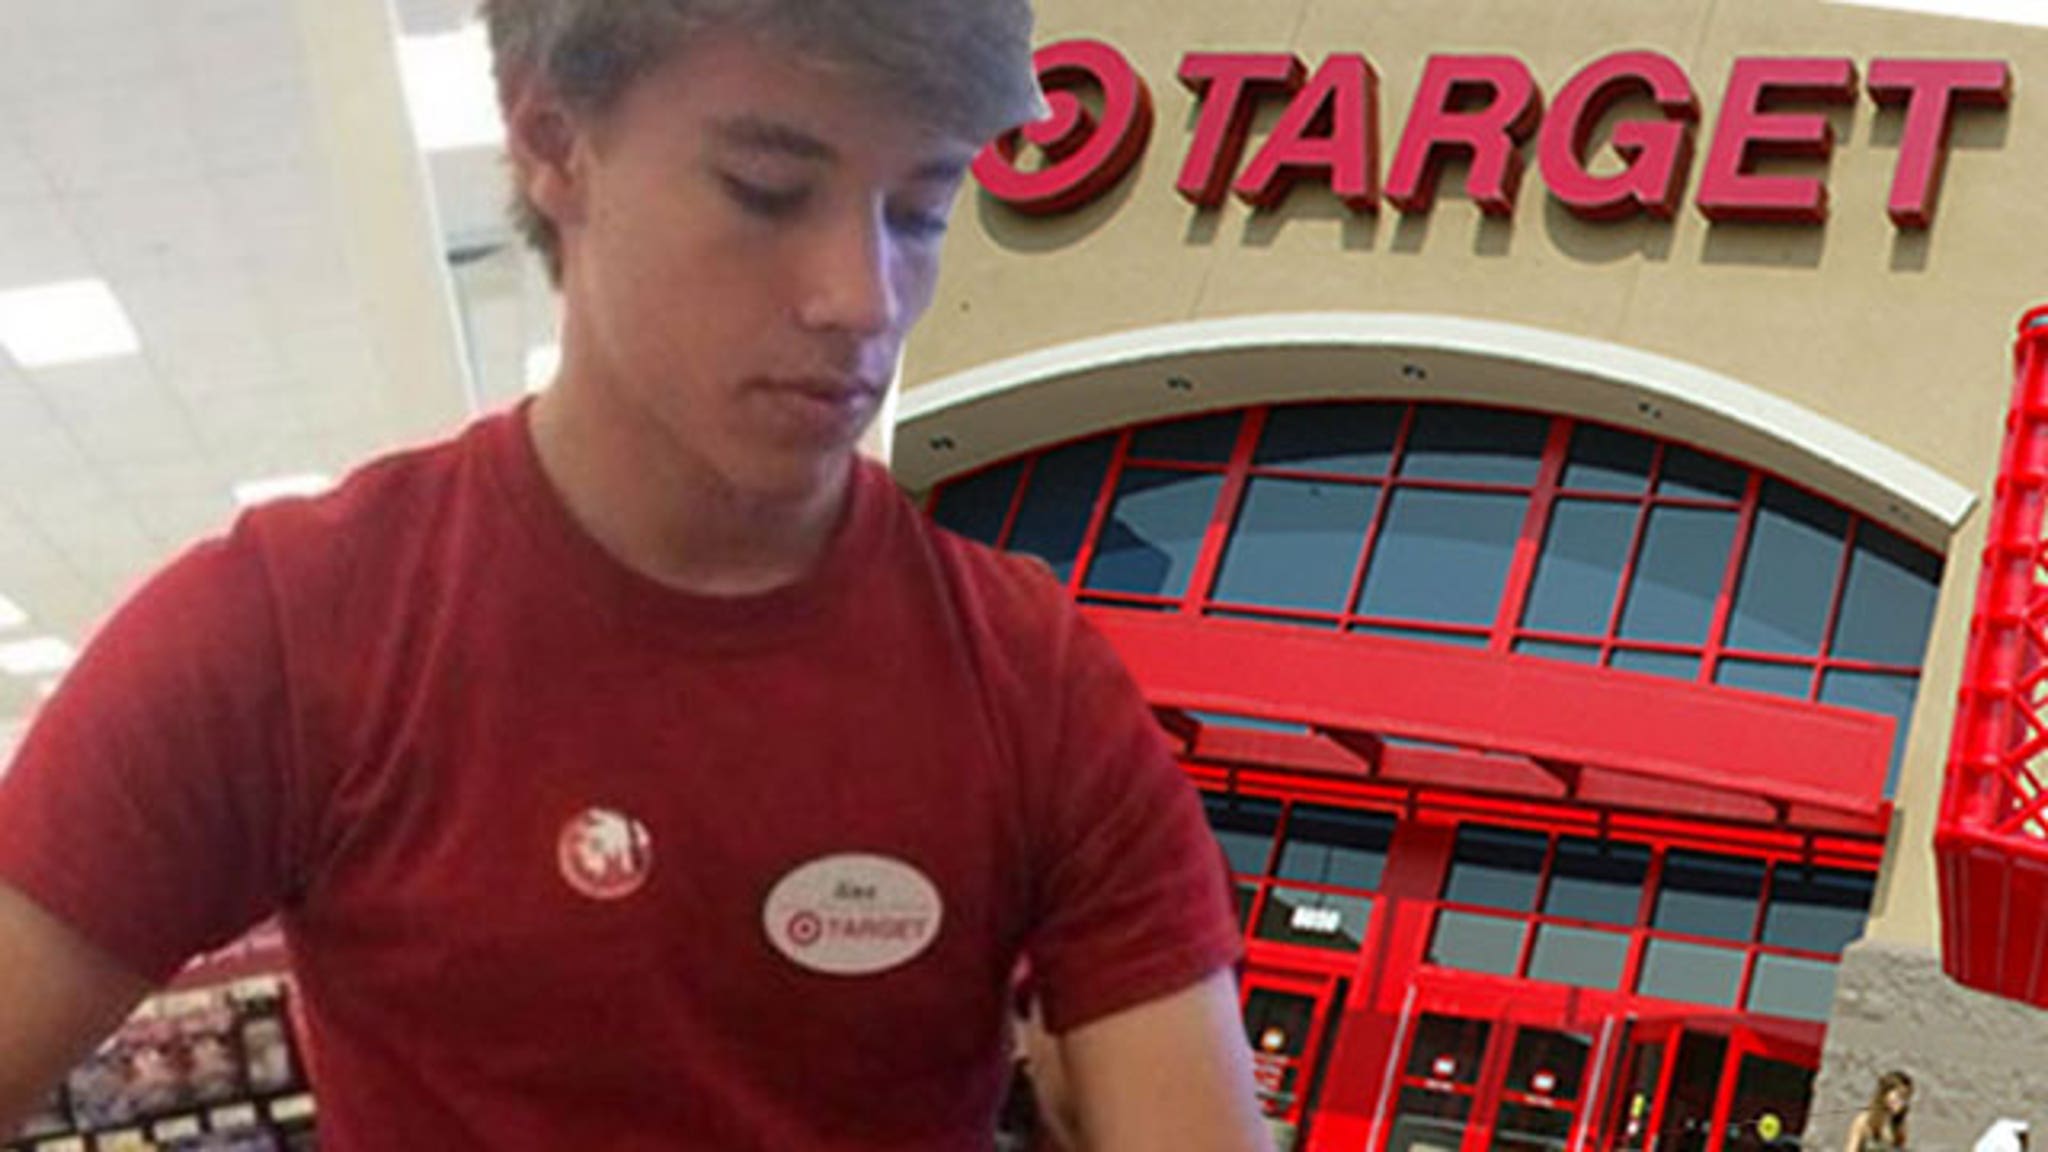 Only target. Alex from target.